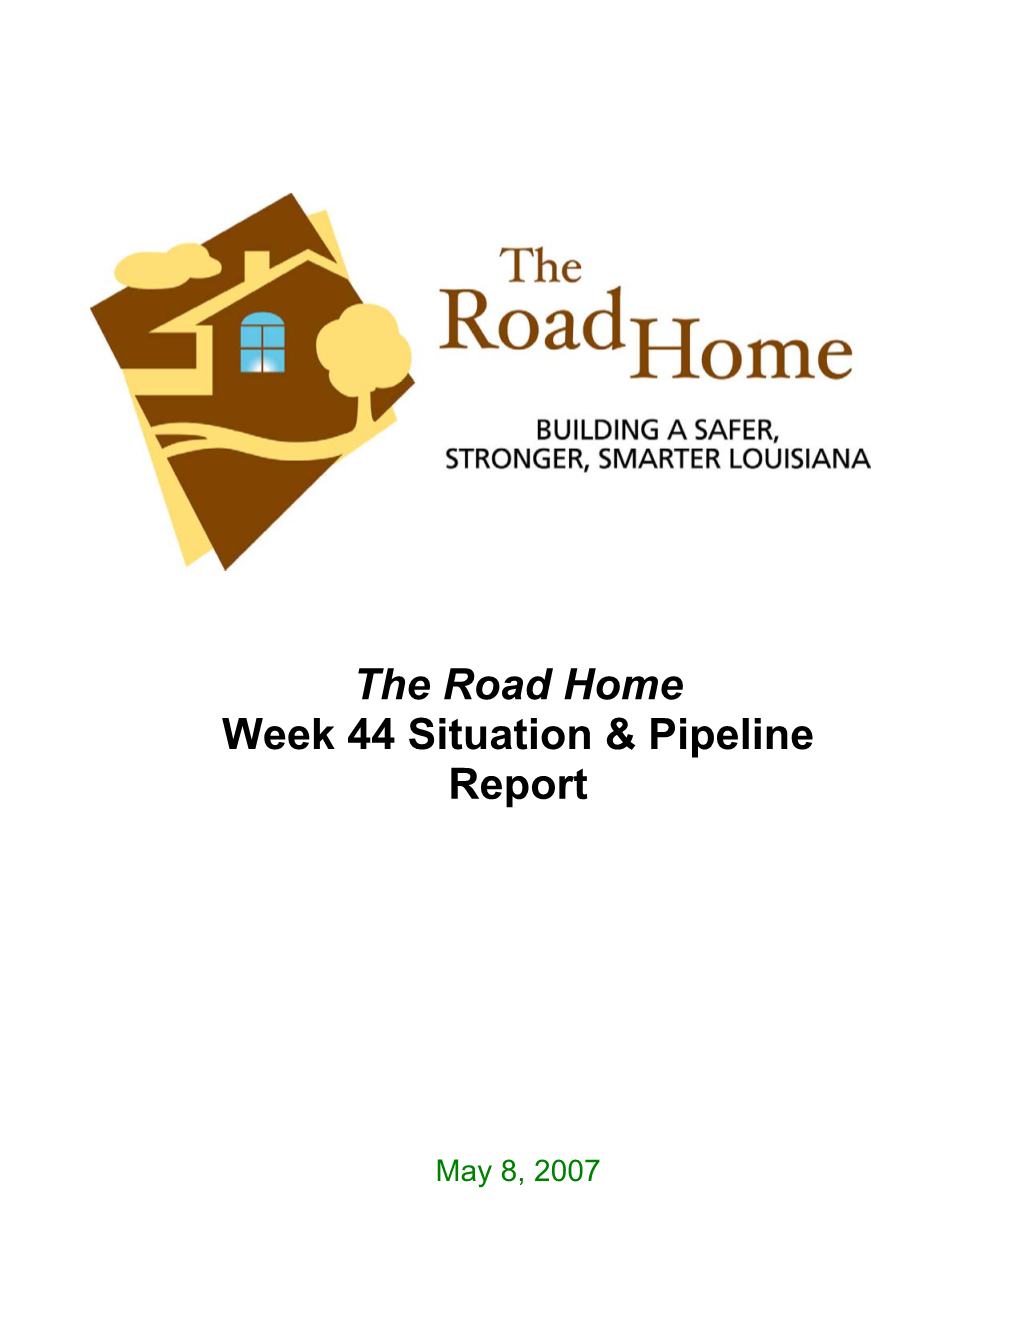 The Road Home Week 44 Situation & Pipeline Report